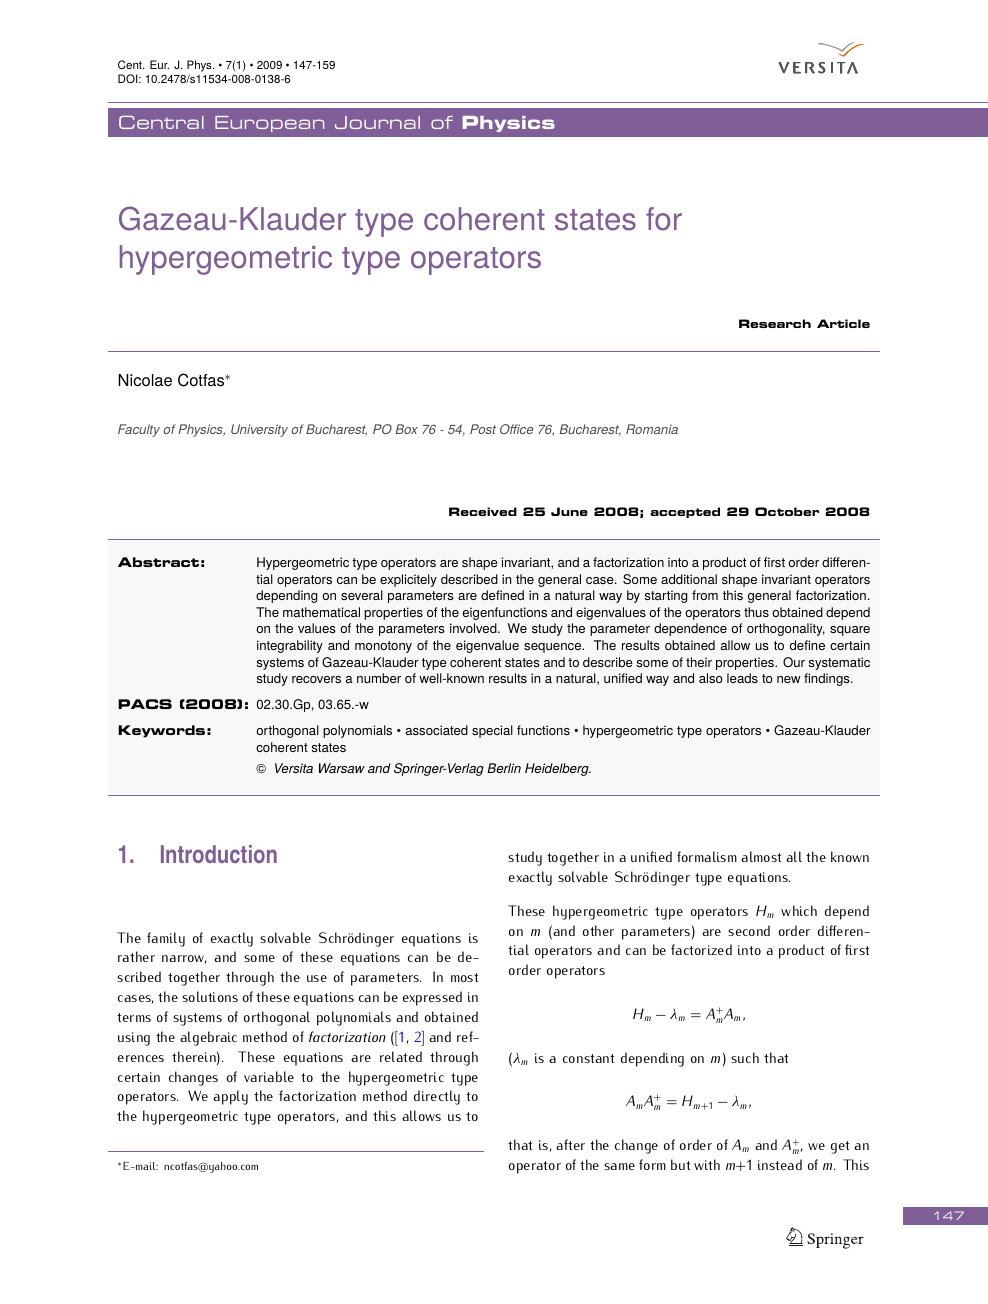 Gazeau Klauder Type Coherent States For Hypergeometric Type Operators Topic Of Research Paper In Mathematics Download Scholarly Article Pdf And Read For Free On Cyberleninka Open Science Hub